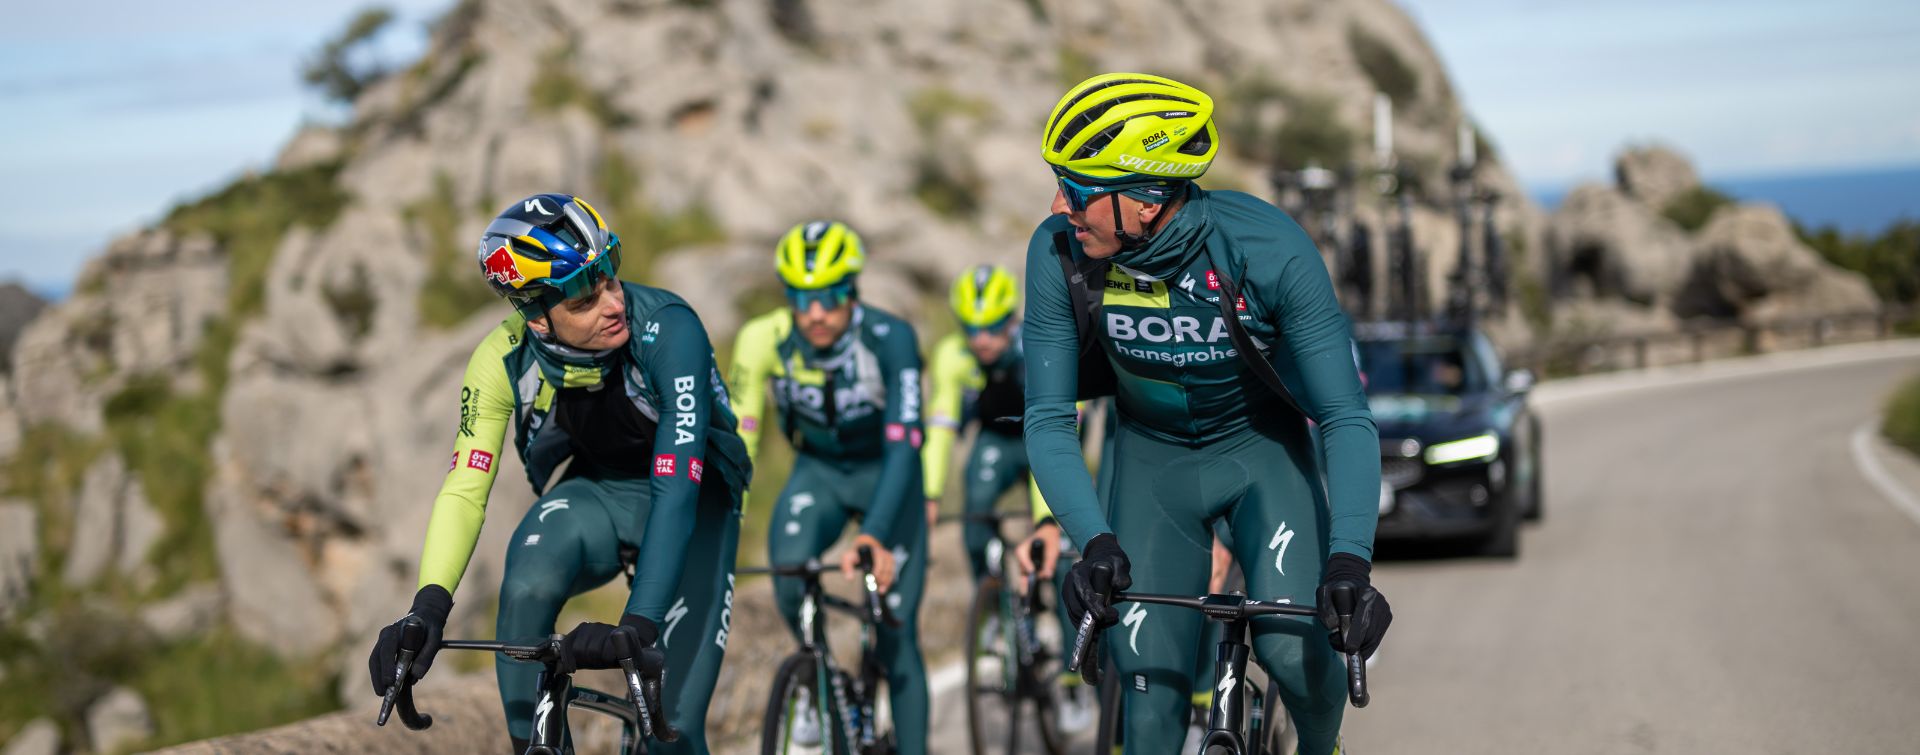 image_borahansgrohecollection_01_update